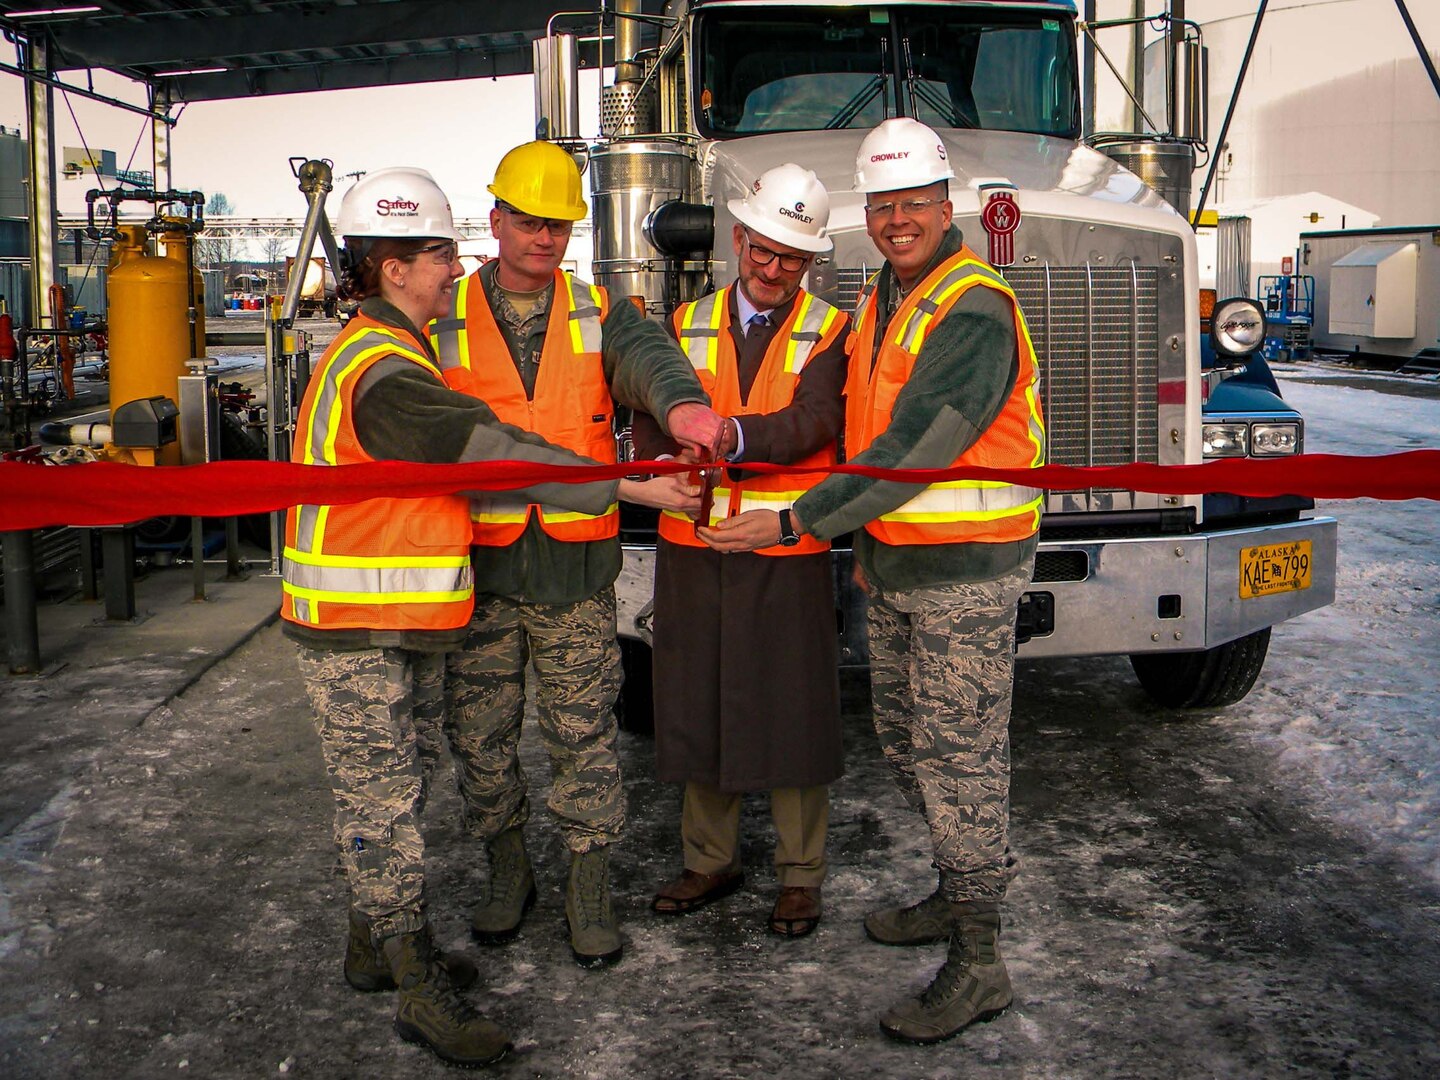 Four individuals cut a ceremonial ribbon for the opening of a new tank truck fueling station.